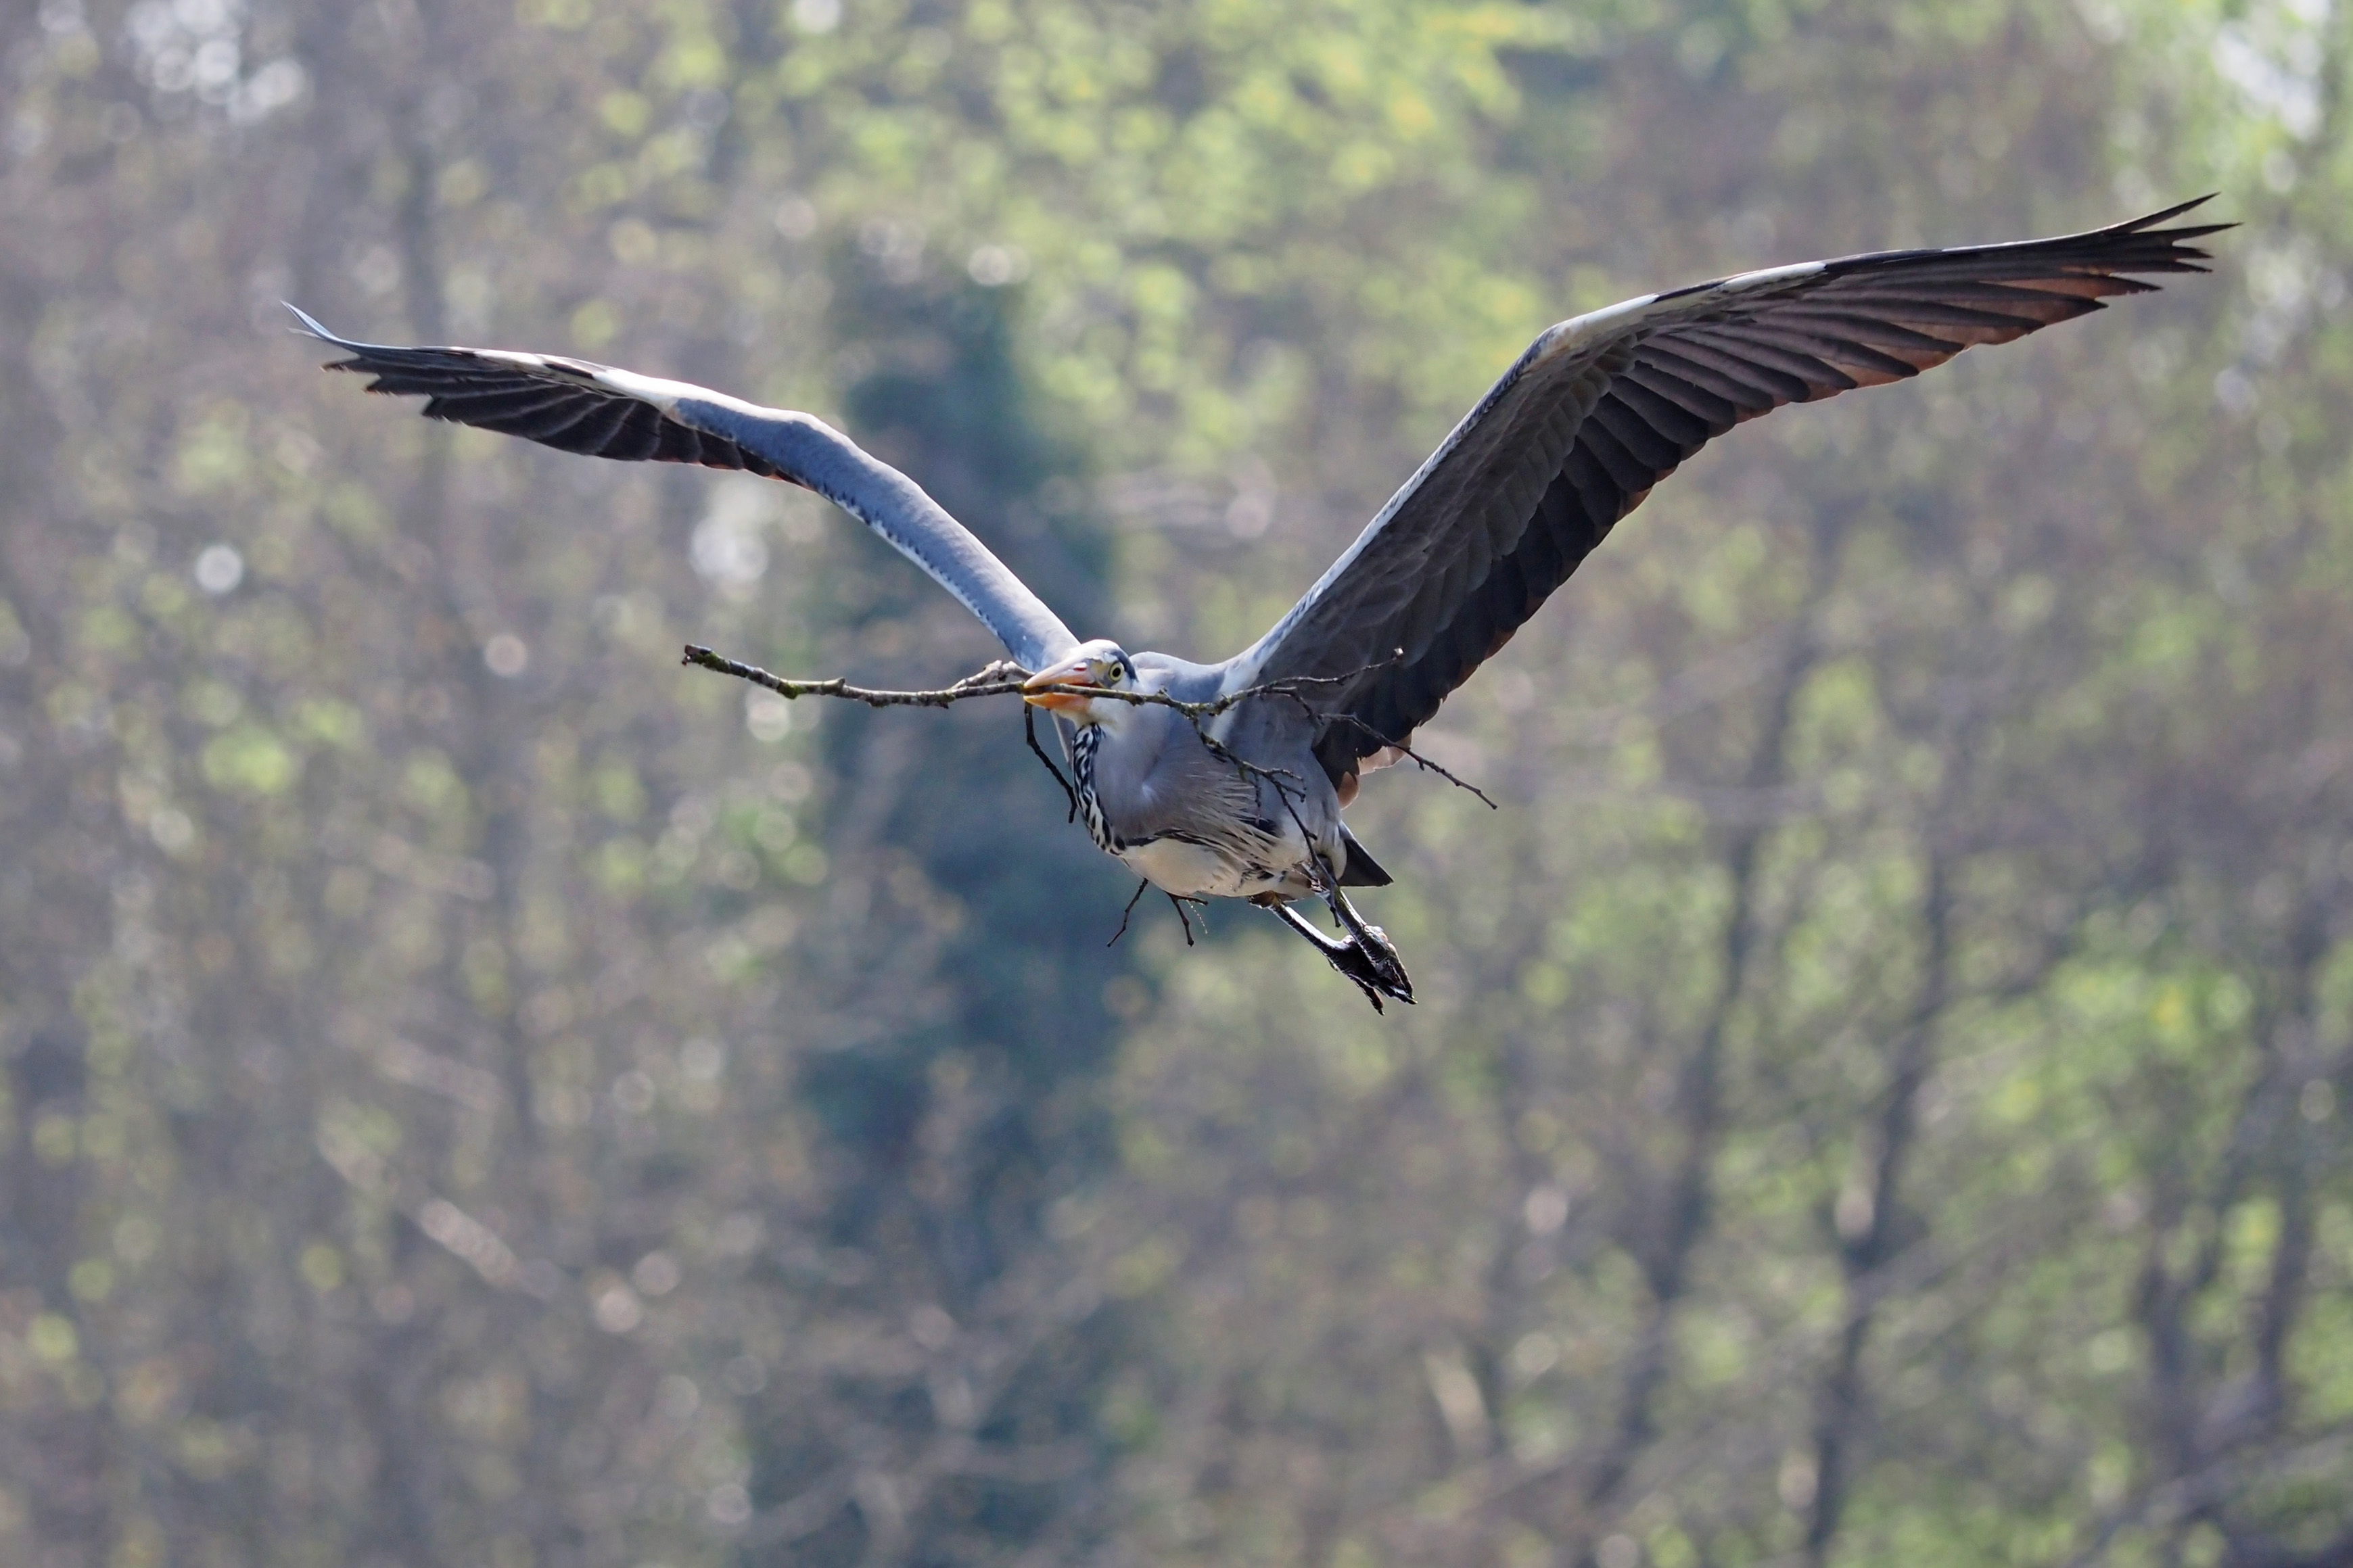 OM System 40-150mm F4 heron sample image, bird in flight with a branch in its beak